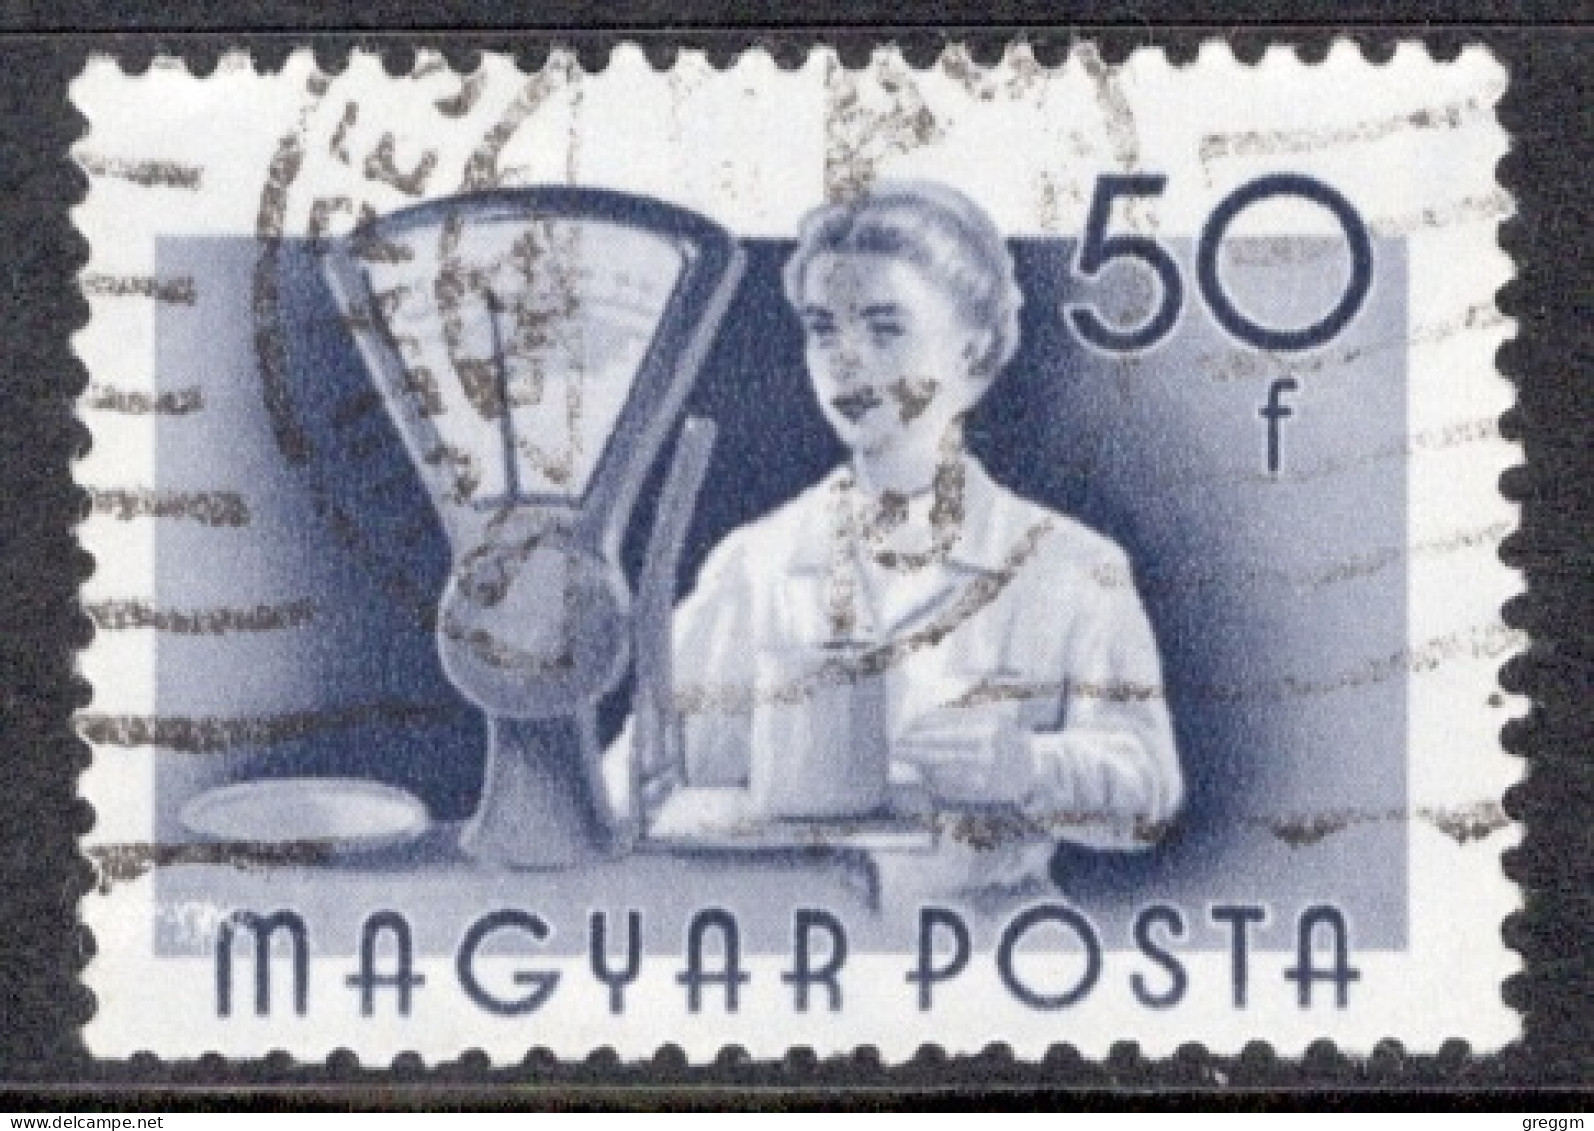 Hungary 1955 Single Stamp Celebrating Occupations In Fine Used - Gebraucht